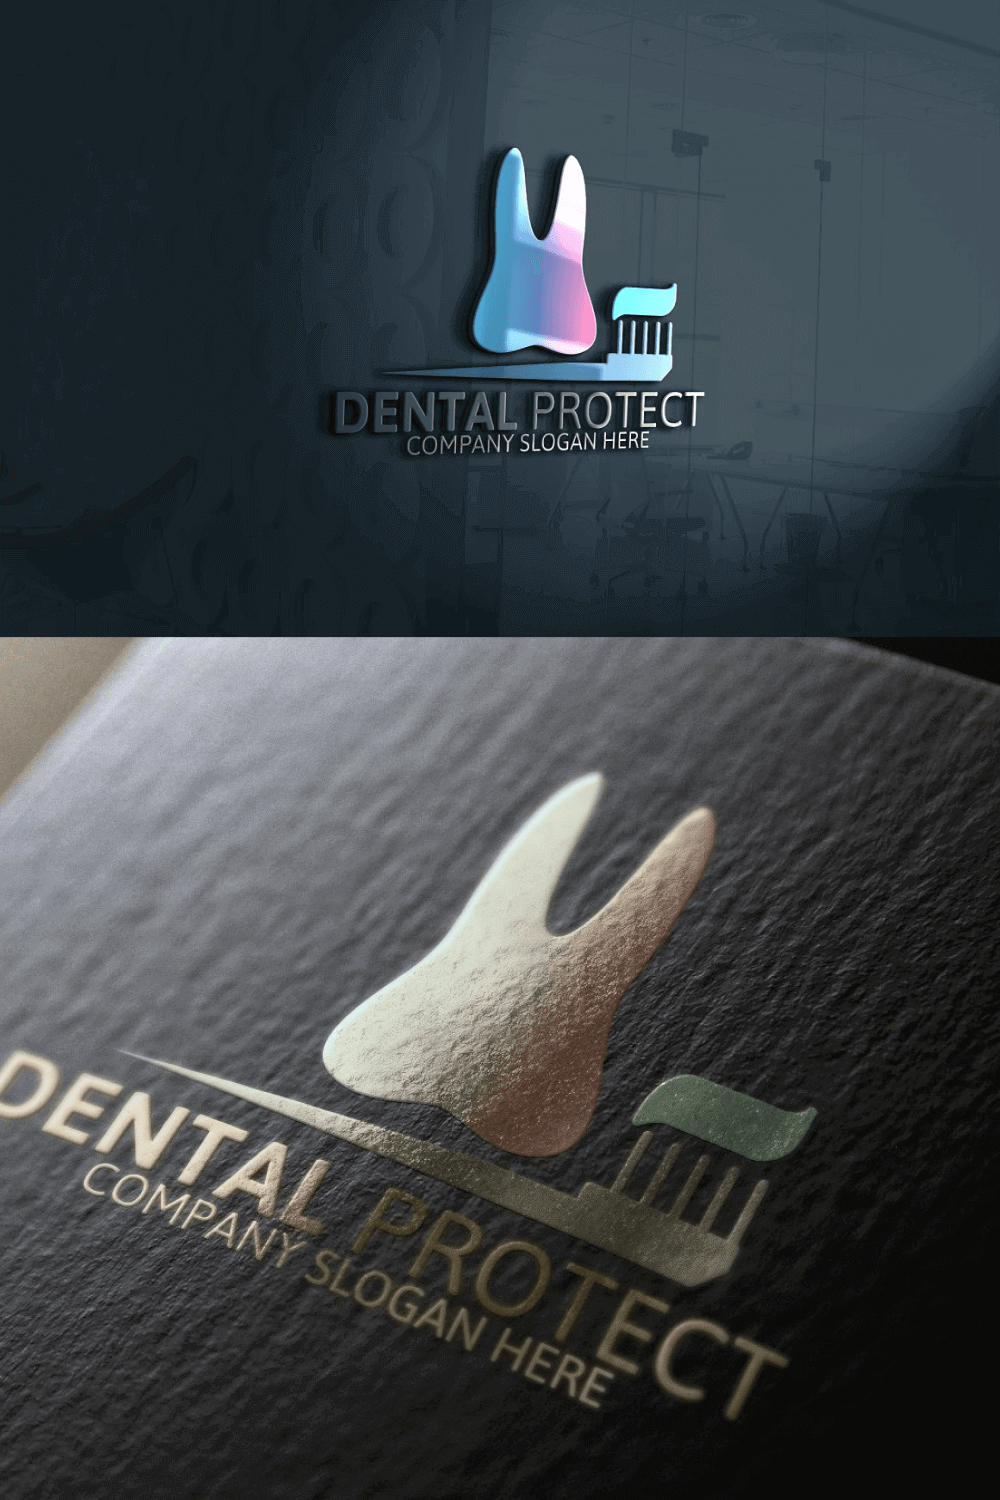 Diagonal Picture of Dental Protect Company.